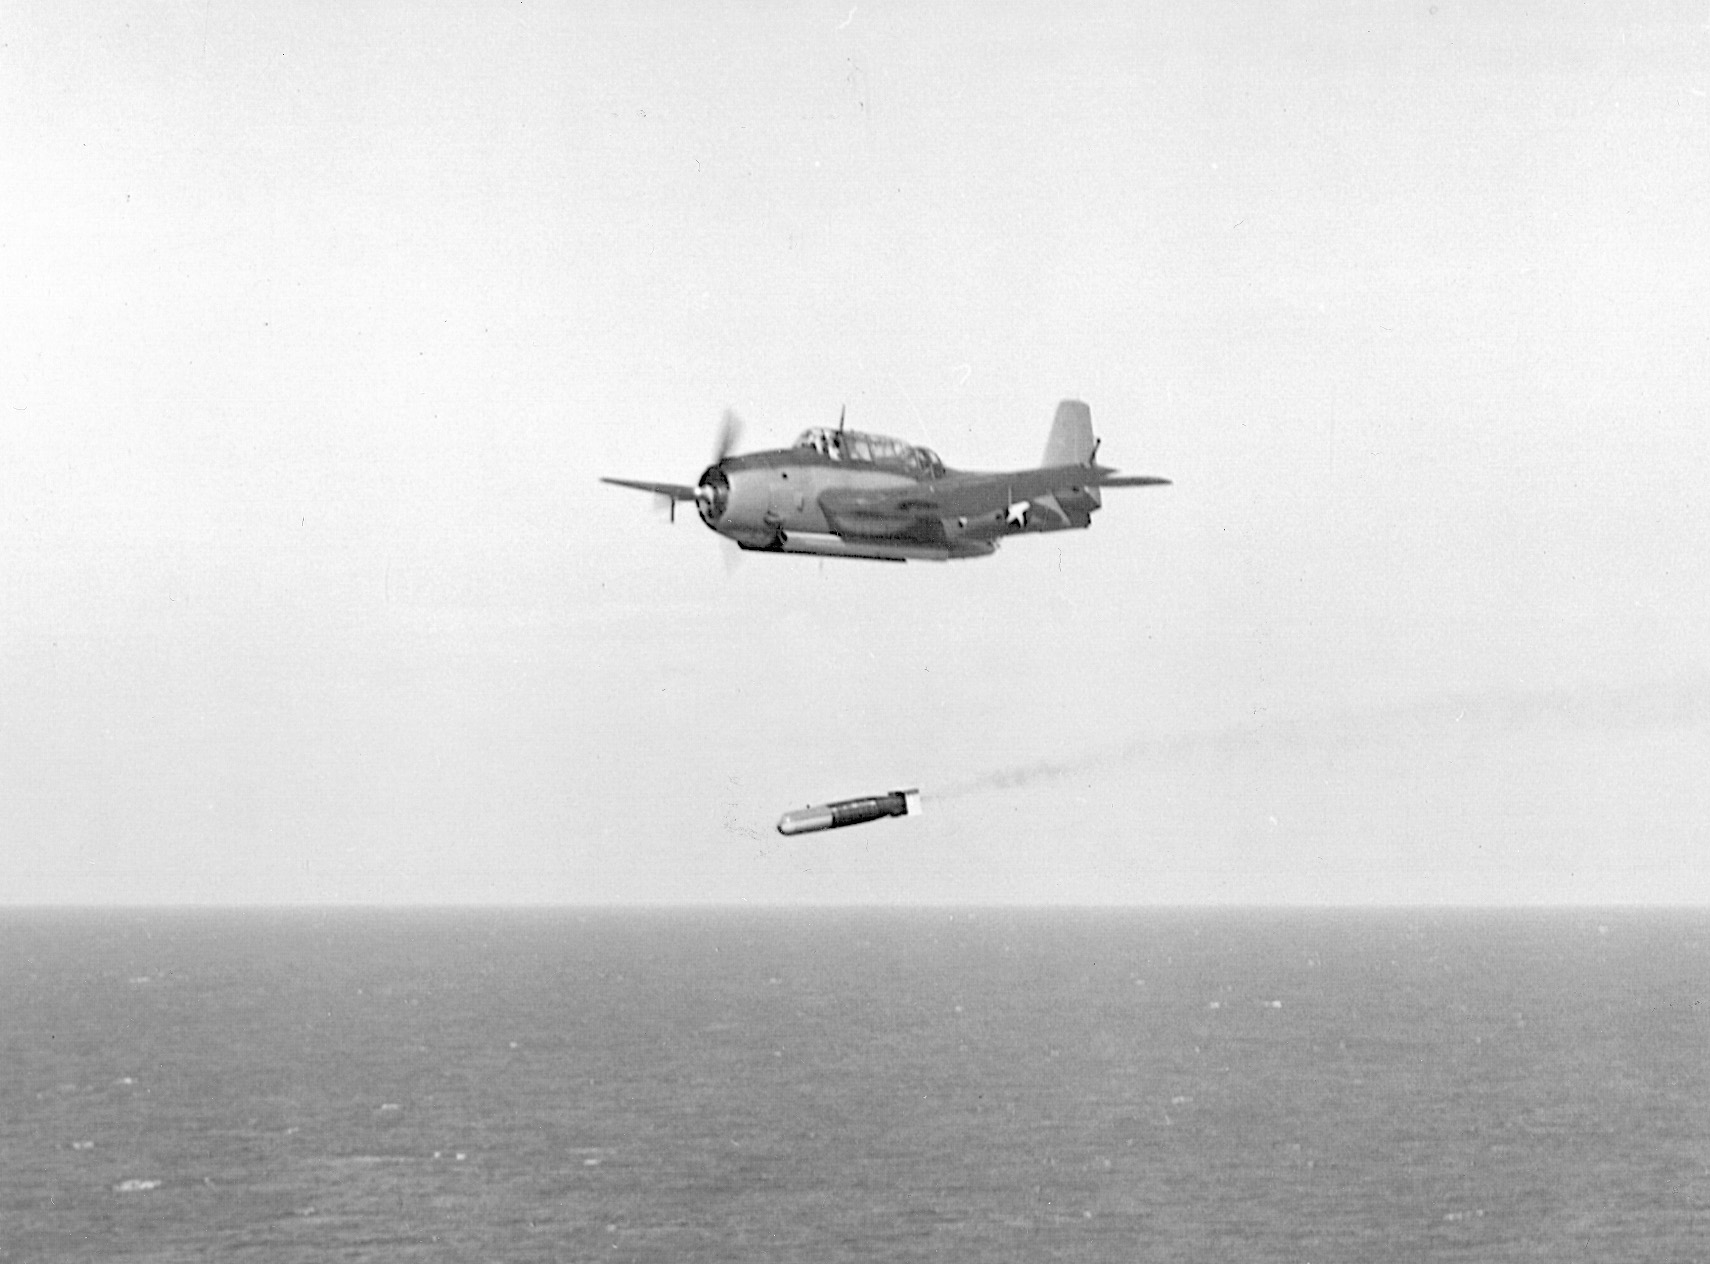 A U.S. Avenger torpedo bomber releases its deadly weapon.